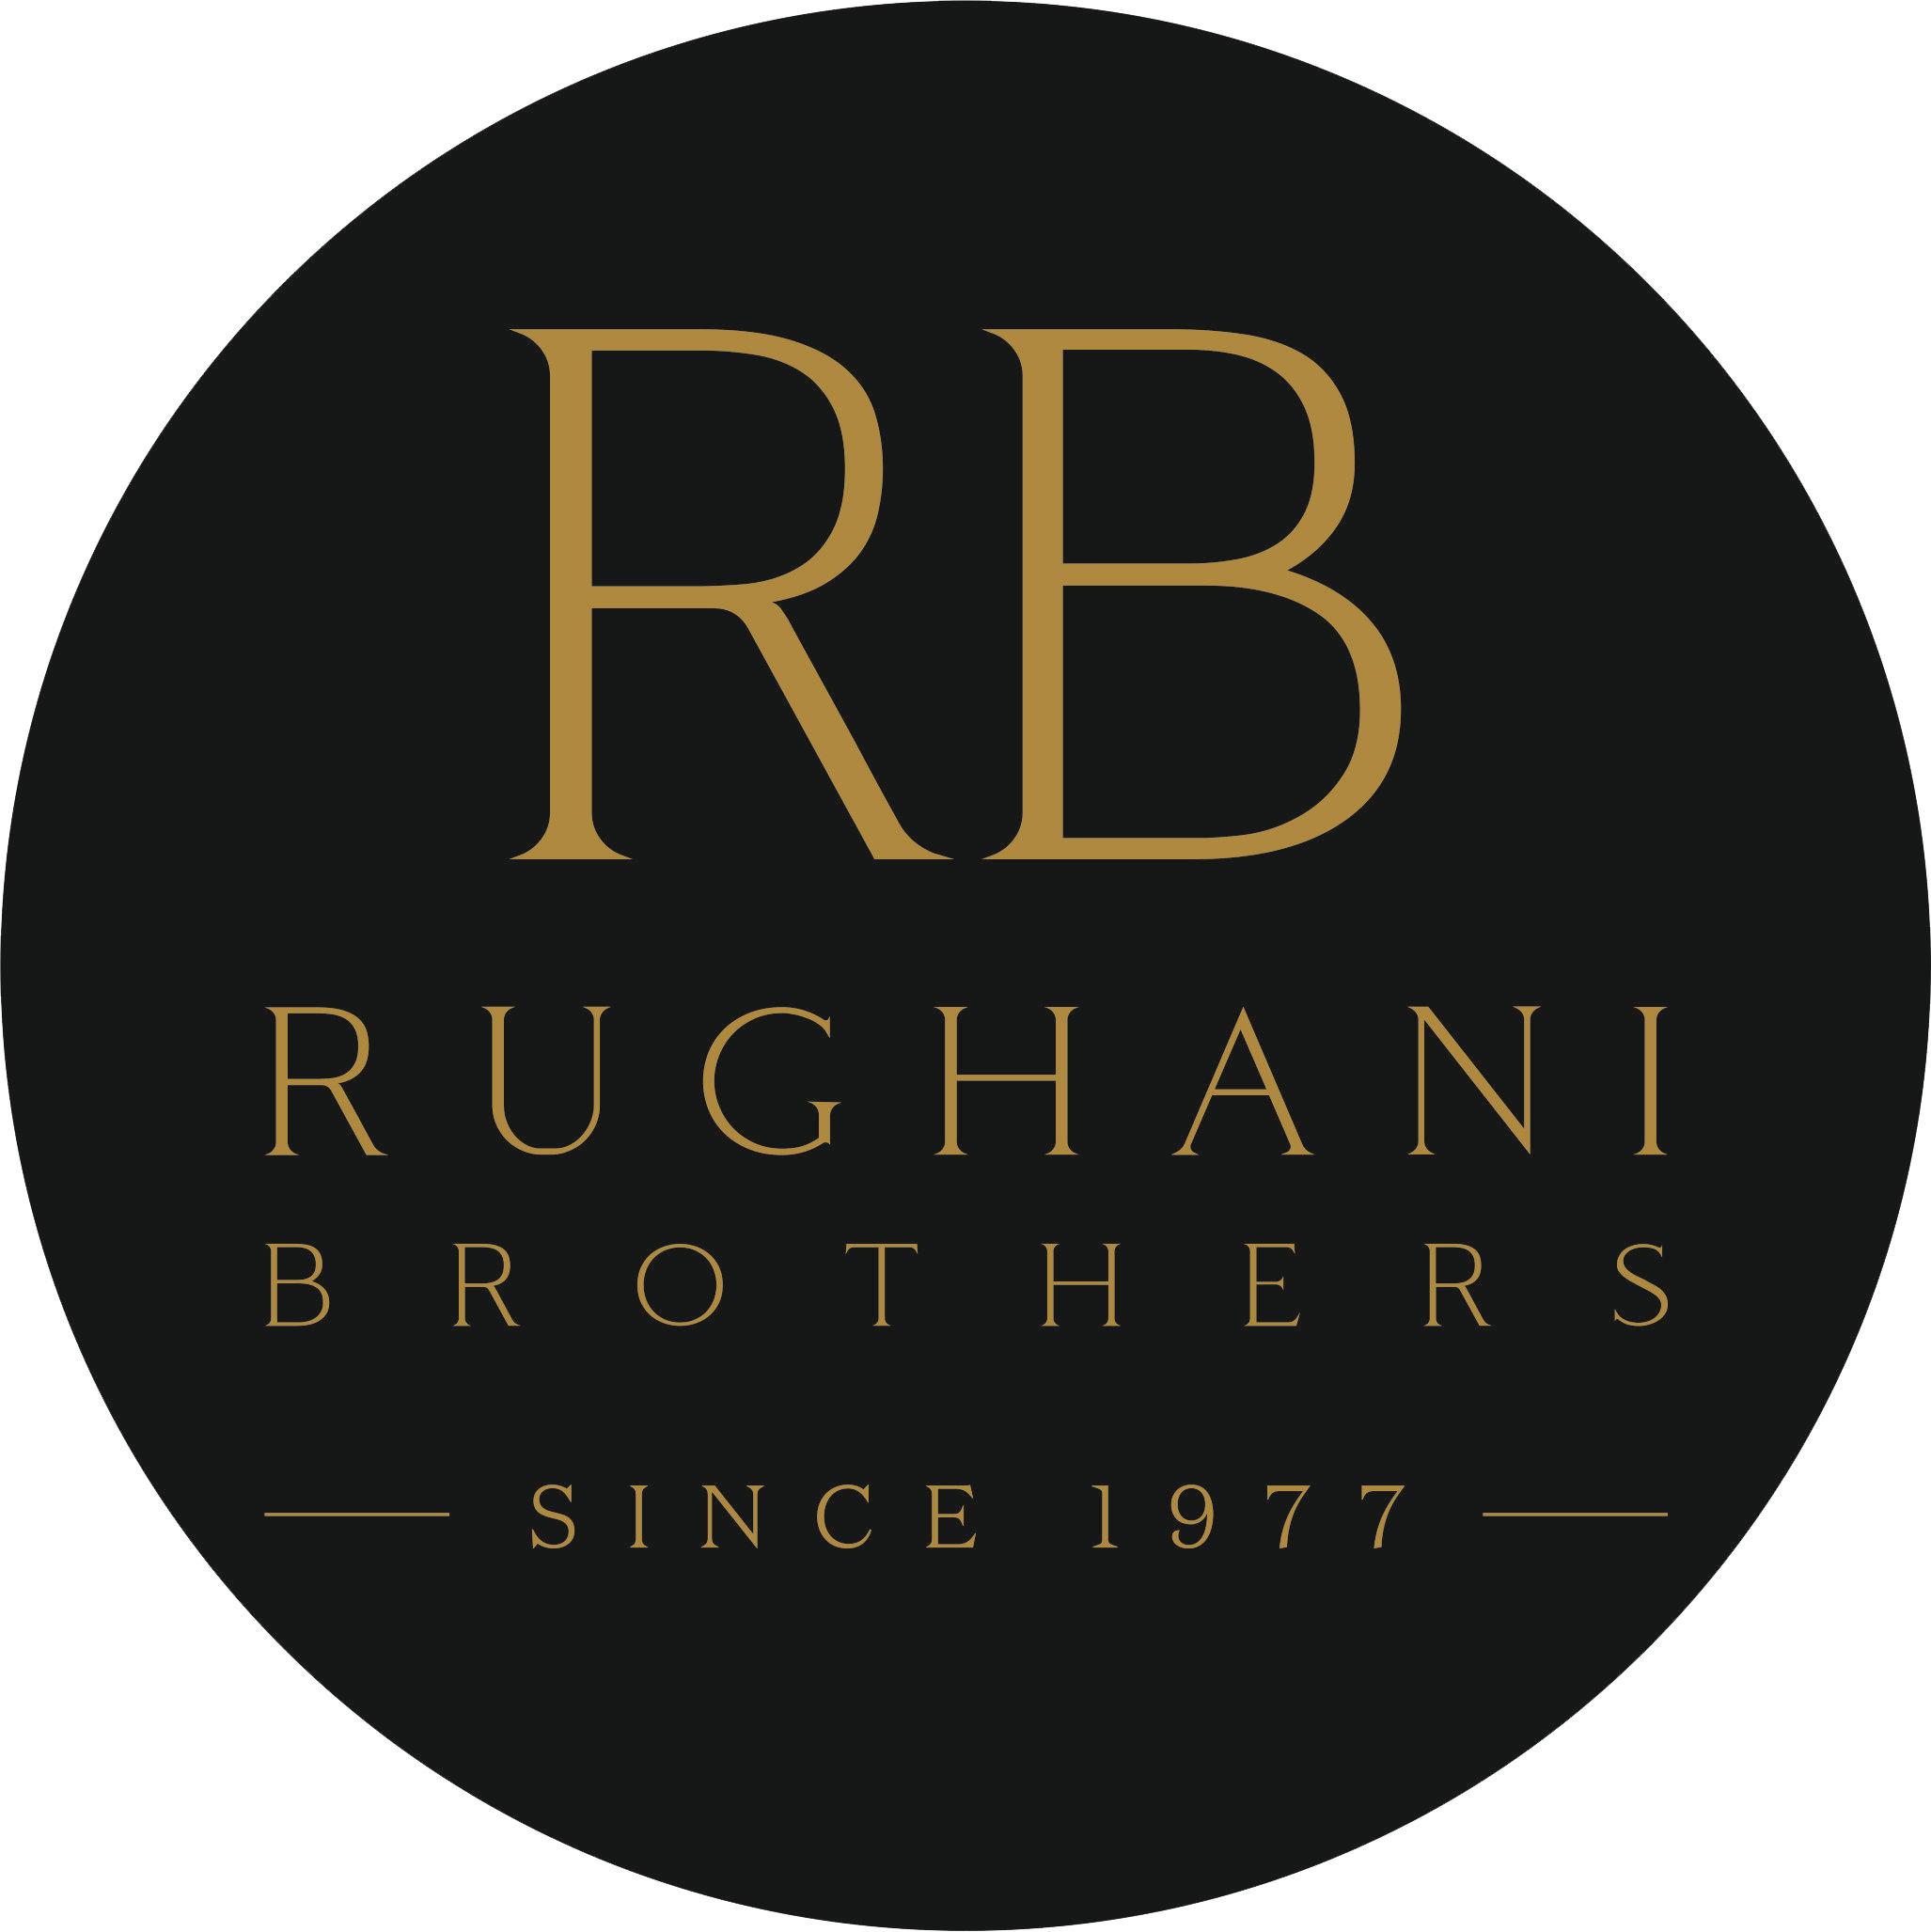 RUGHANI BROTHERS